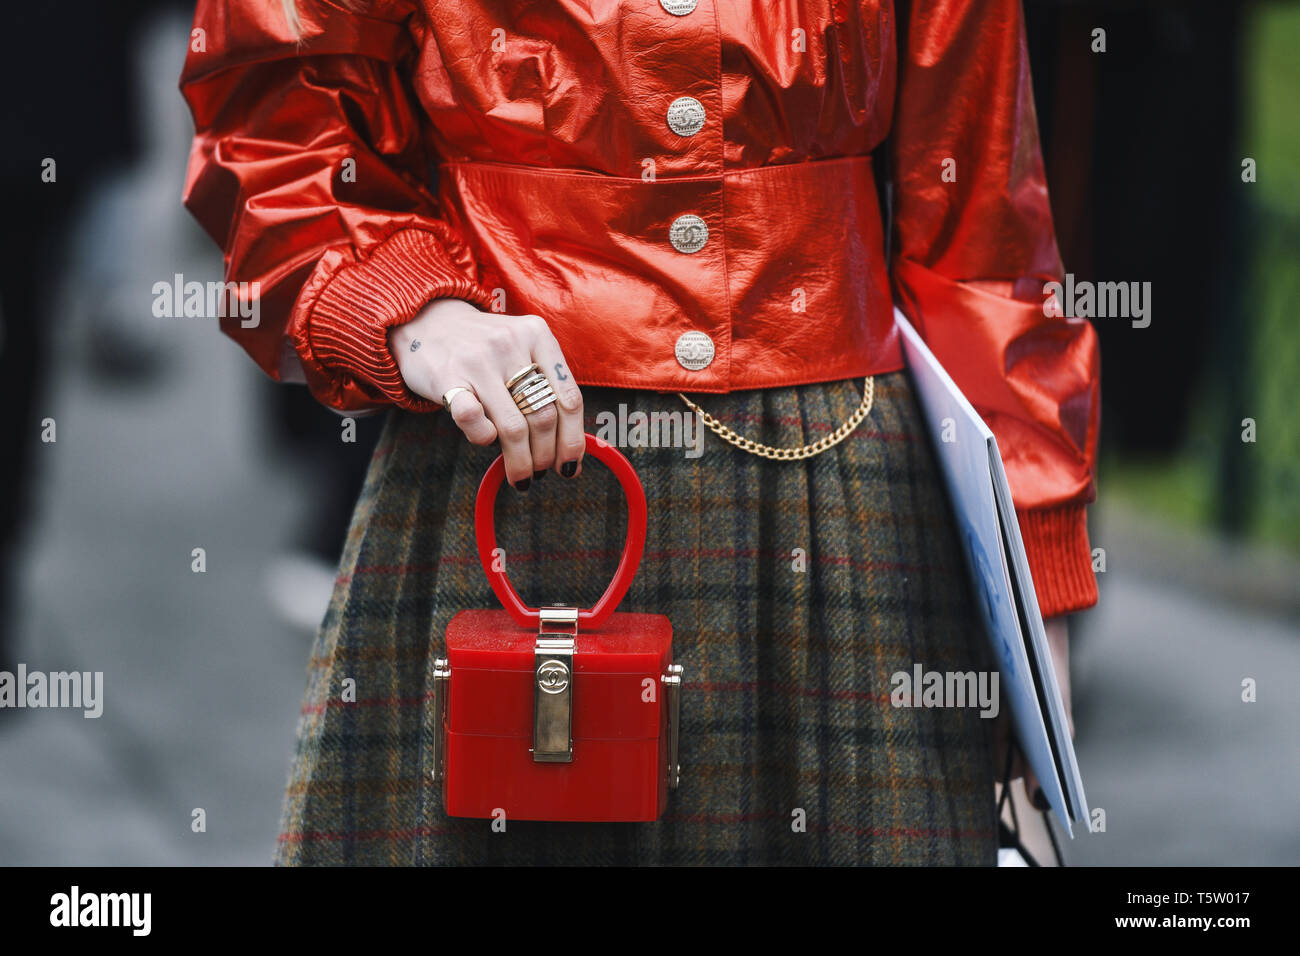 Paris, France - March 5, 2019: Street Style - Woman Wearing Chanel